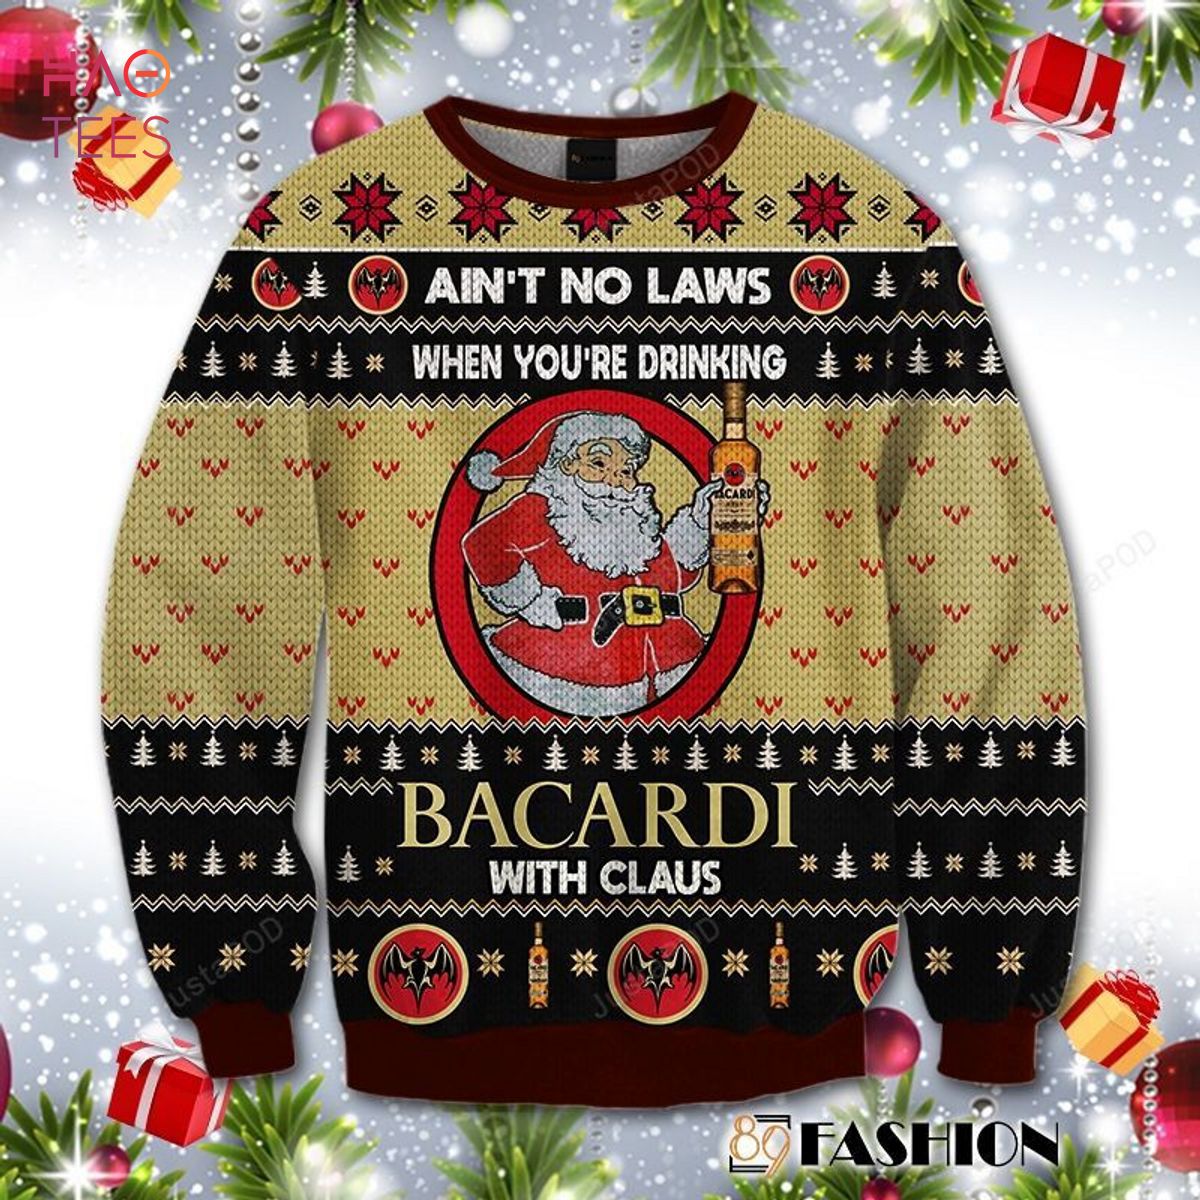 BEST Aint No Laws When You Drink Bacardi With Claus Ugly